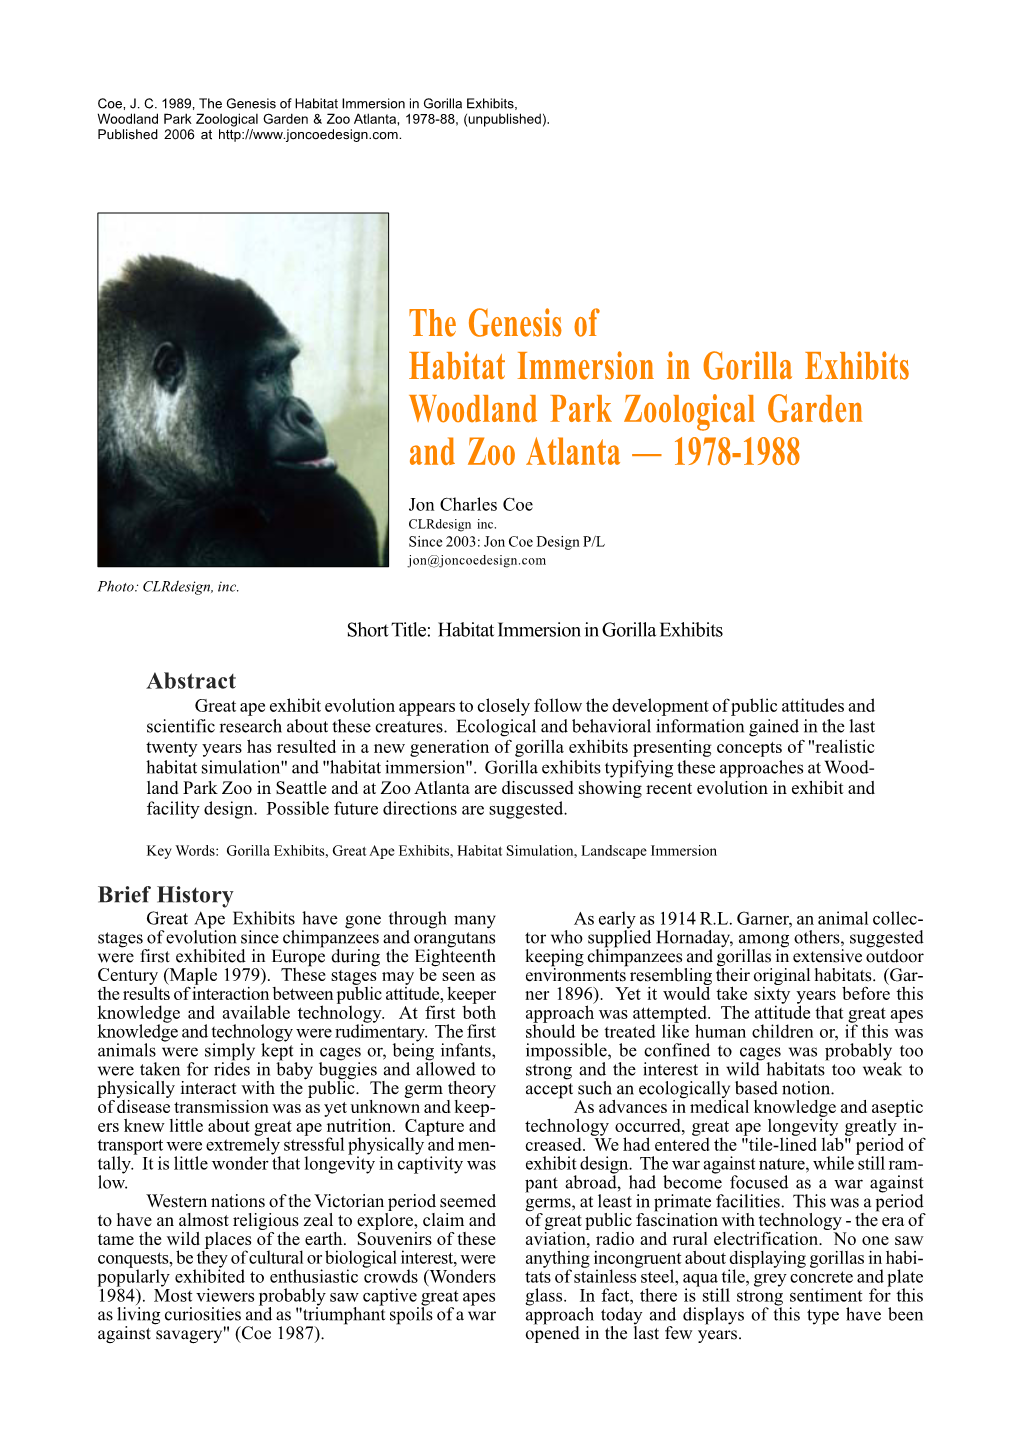 The Genesis of Habitat Immersion in Gorilla Exhibits Woodland Park Zoological Garden and Zoo Atlanta — 1978-1988